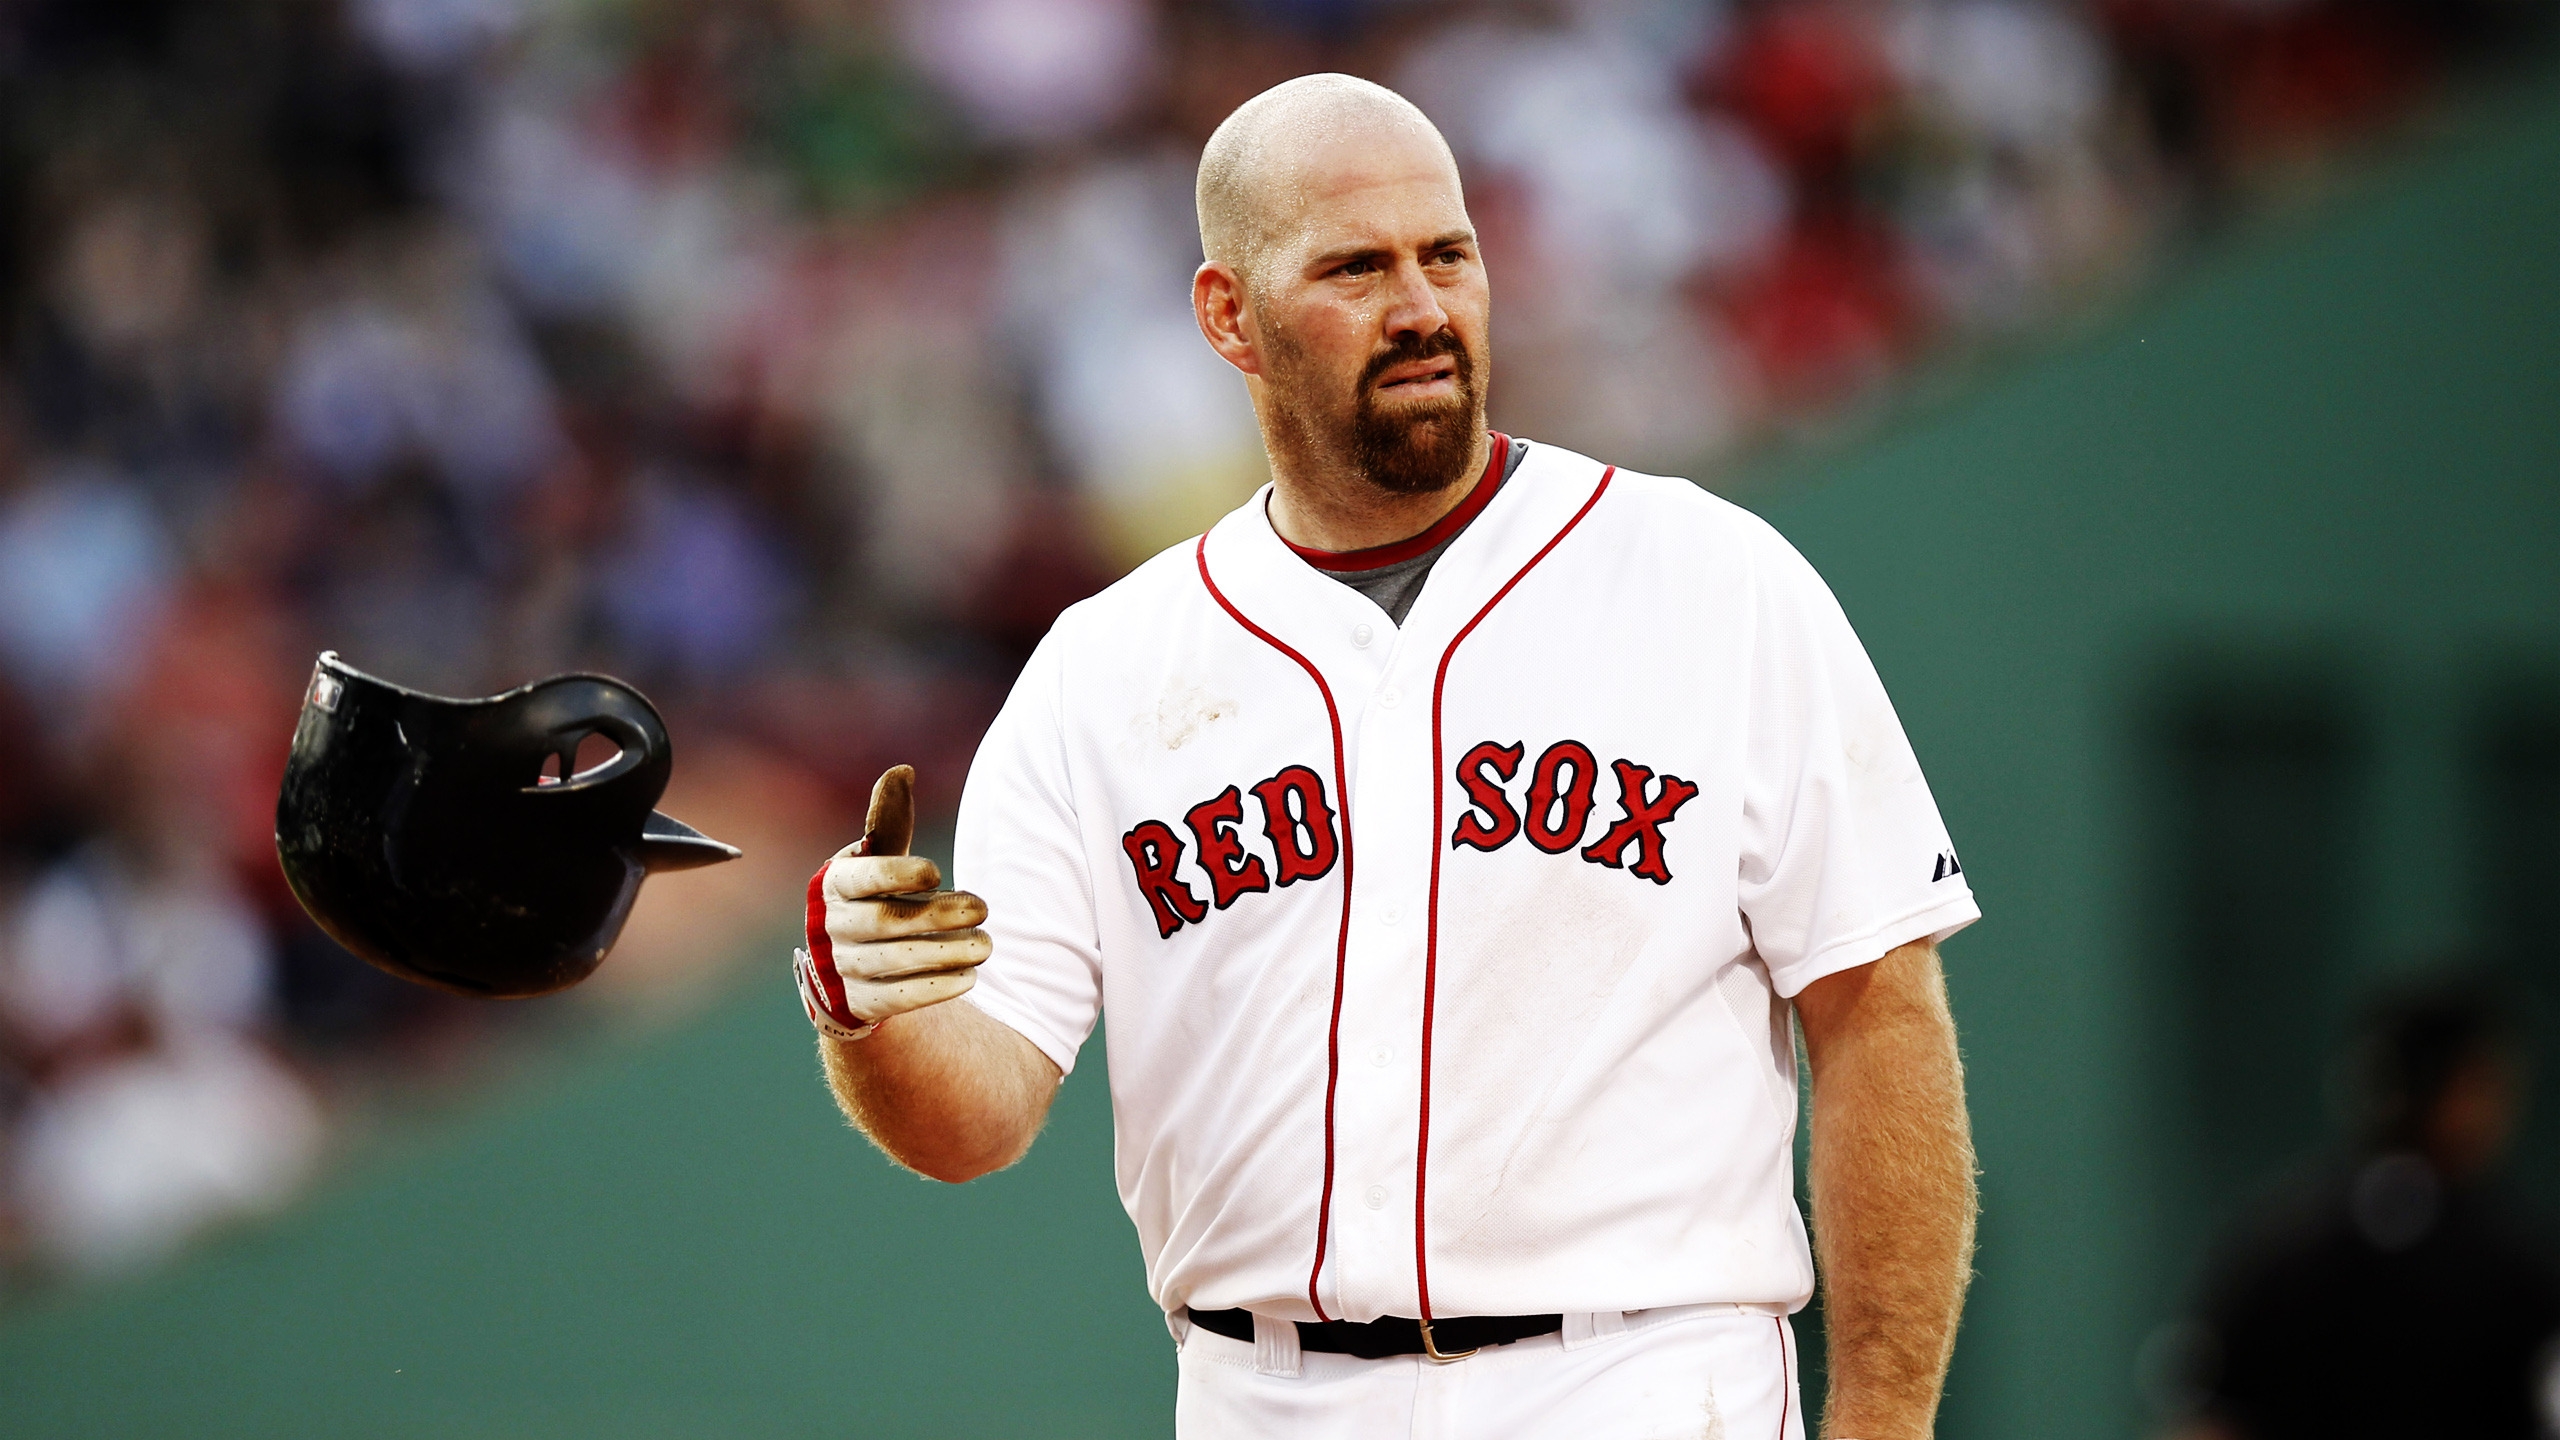 Kevin Youkilis for 2560x1440 HDTV resolution